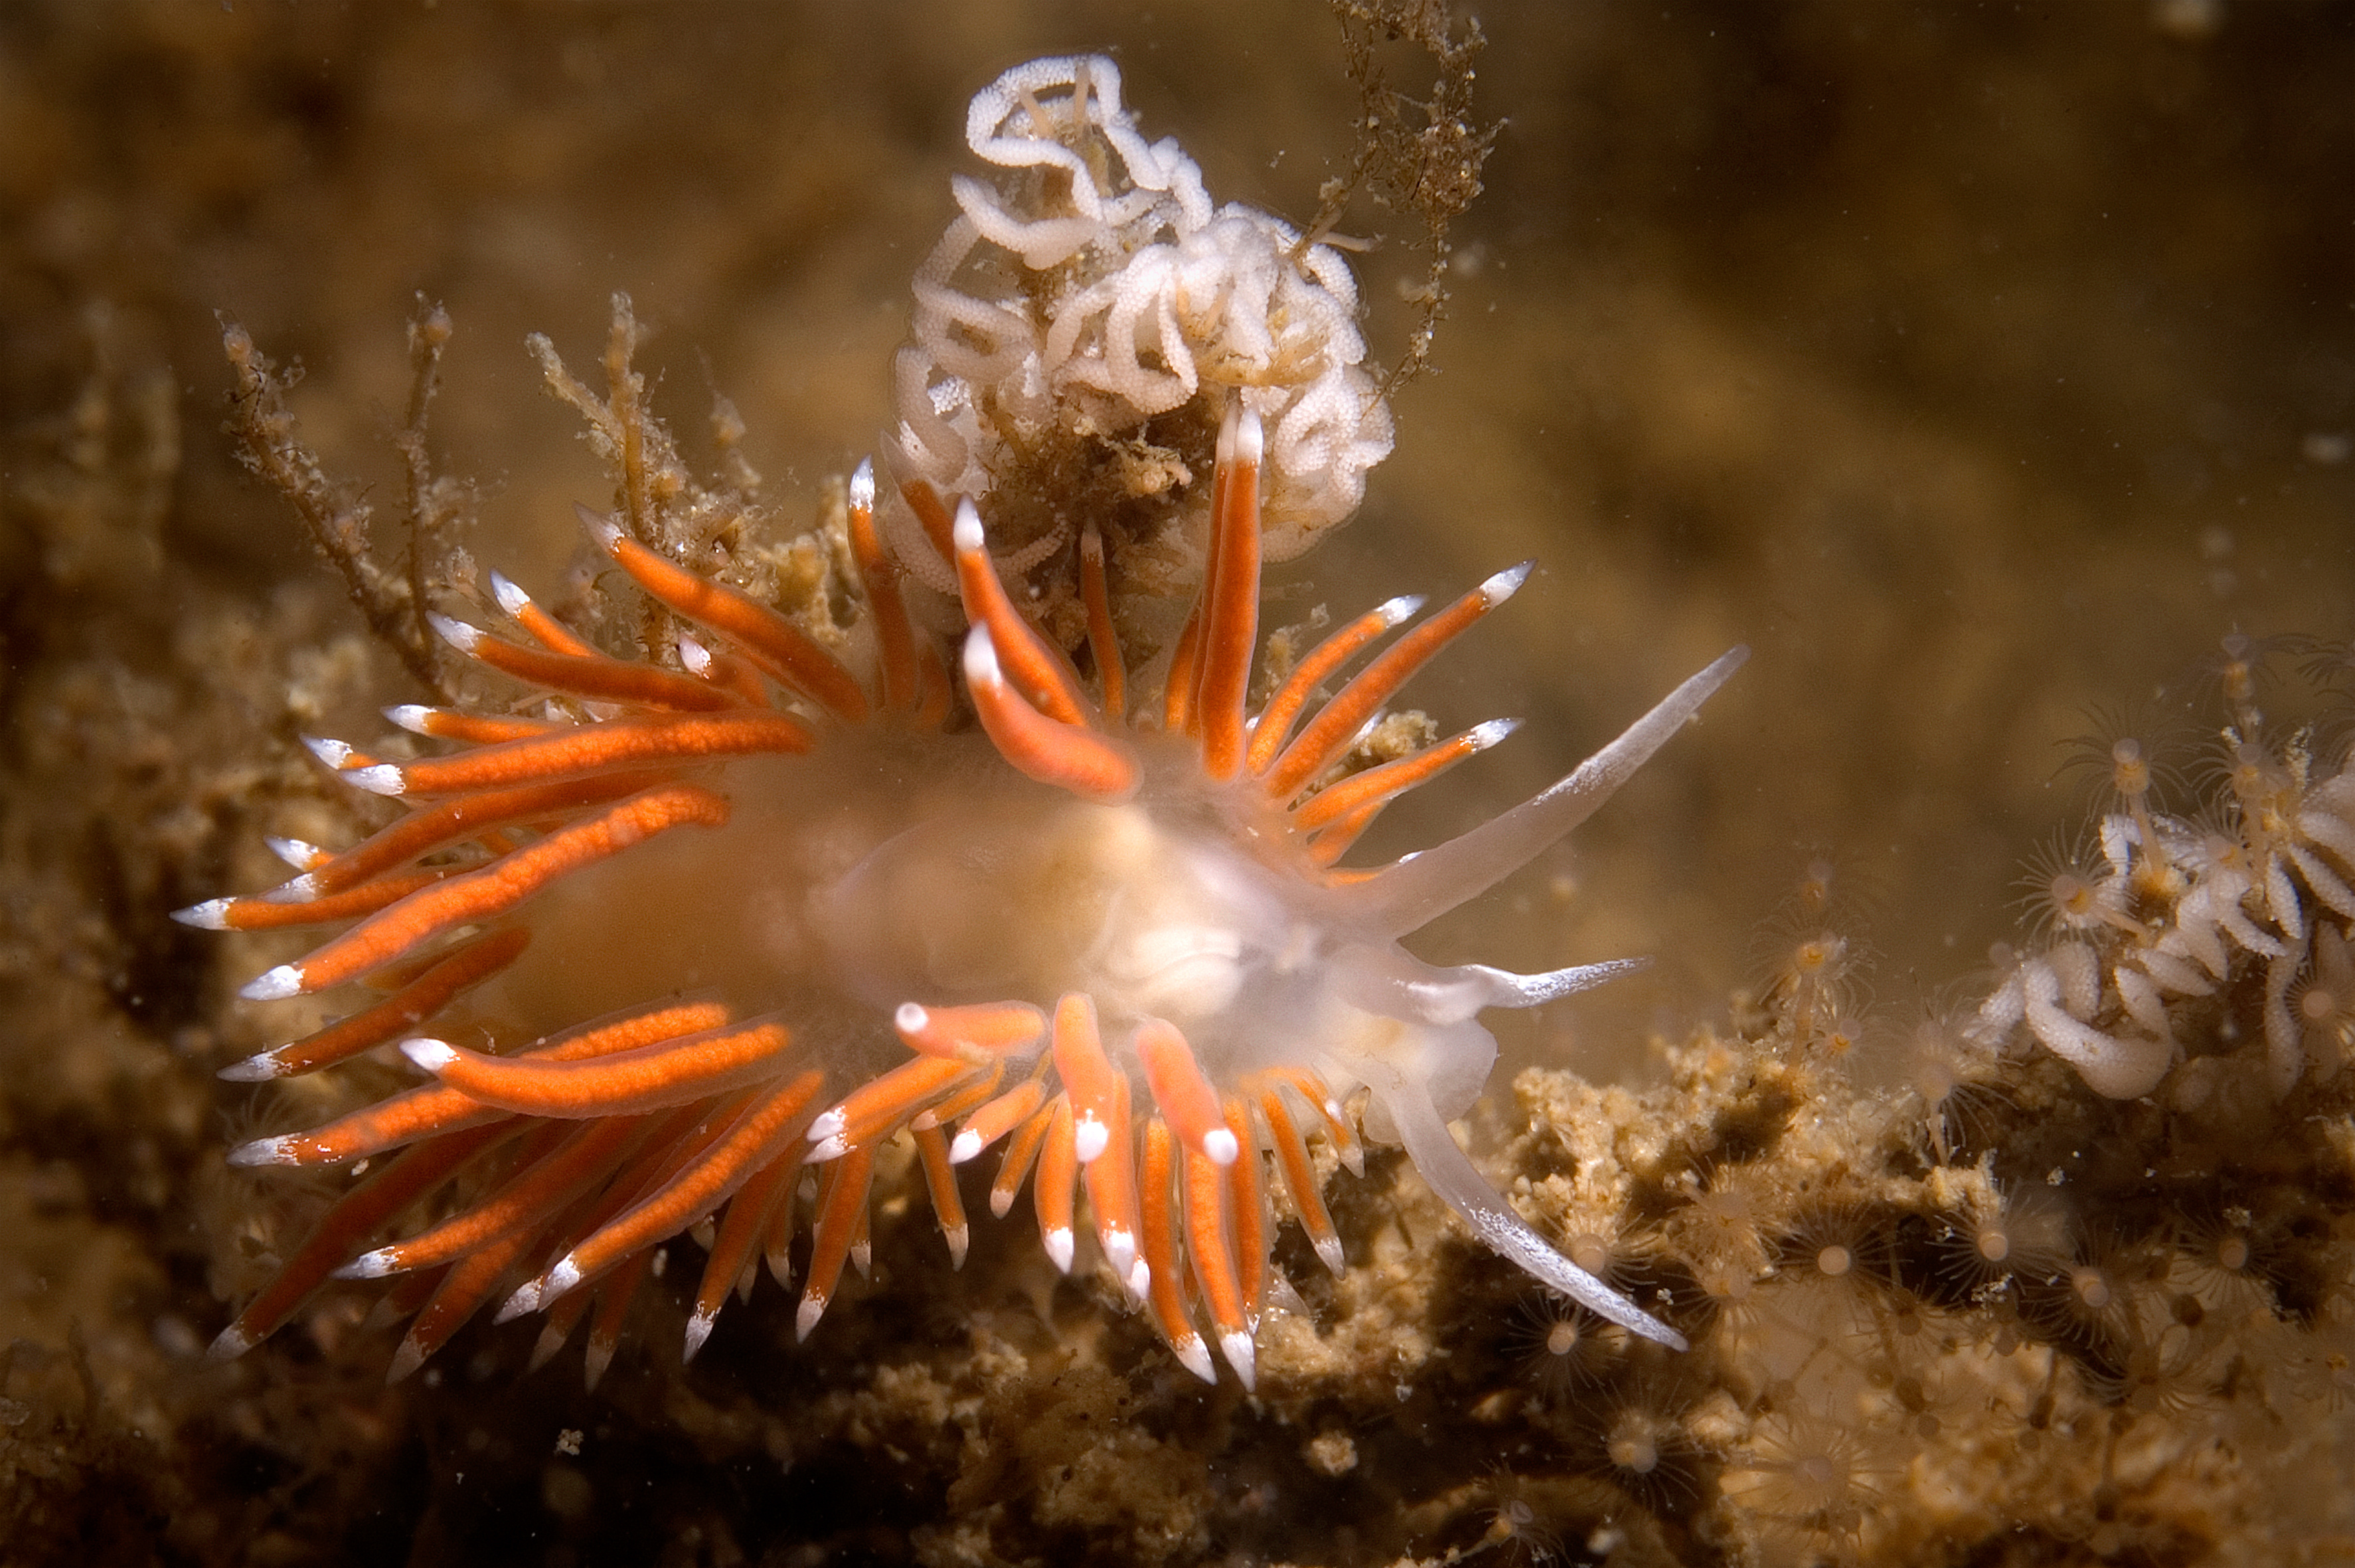 Nervous nudibranch clings to coral structures at the Sooke Bluffs Park dive site in Victoria, Canada